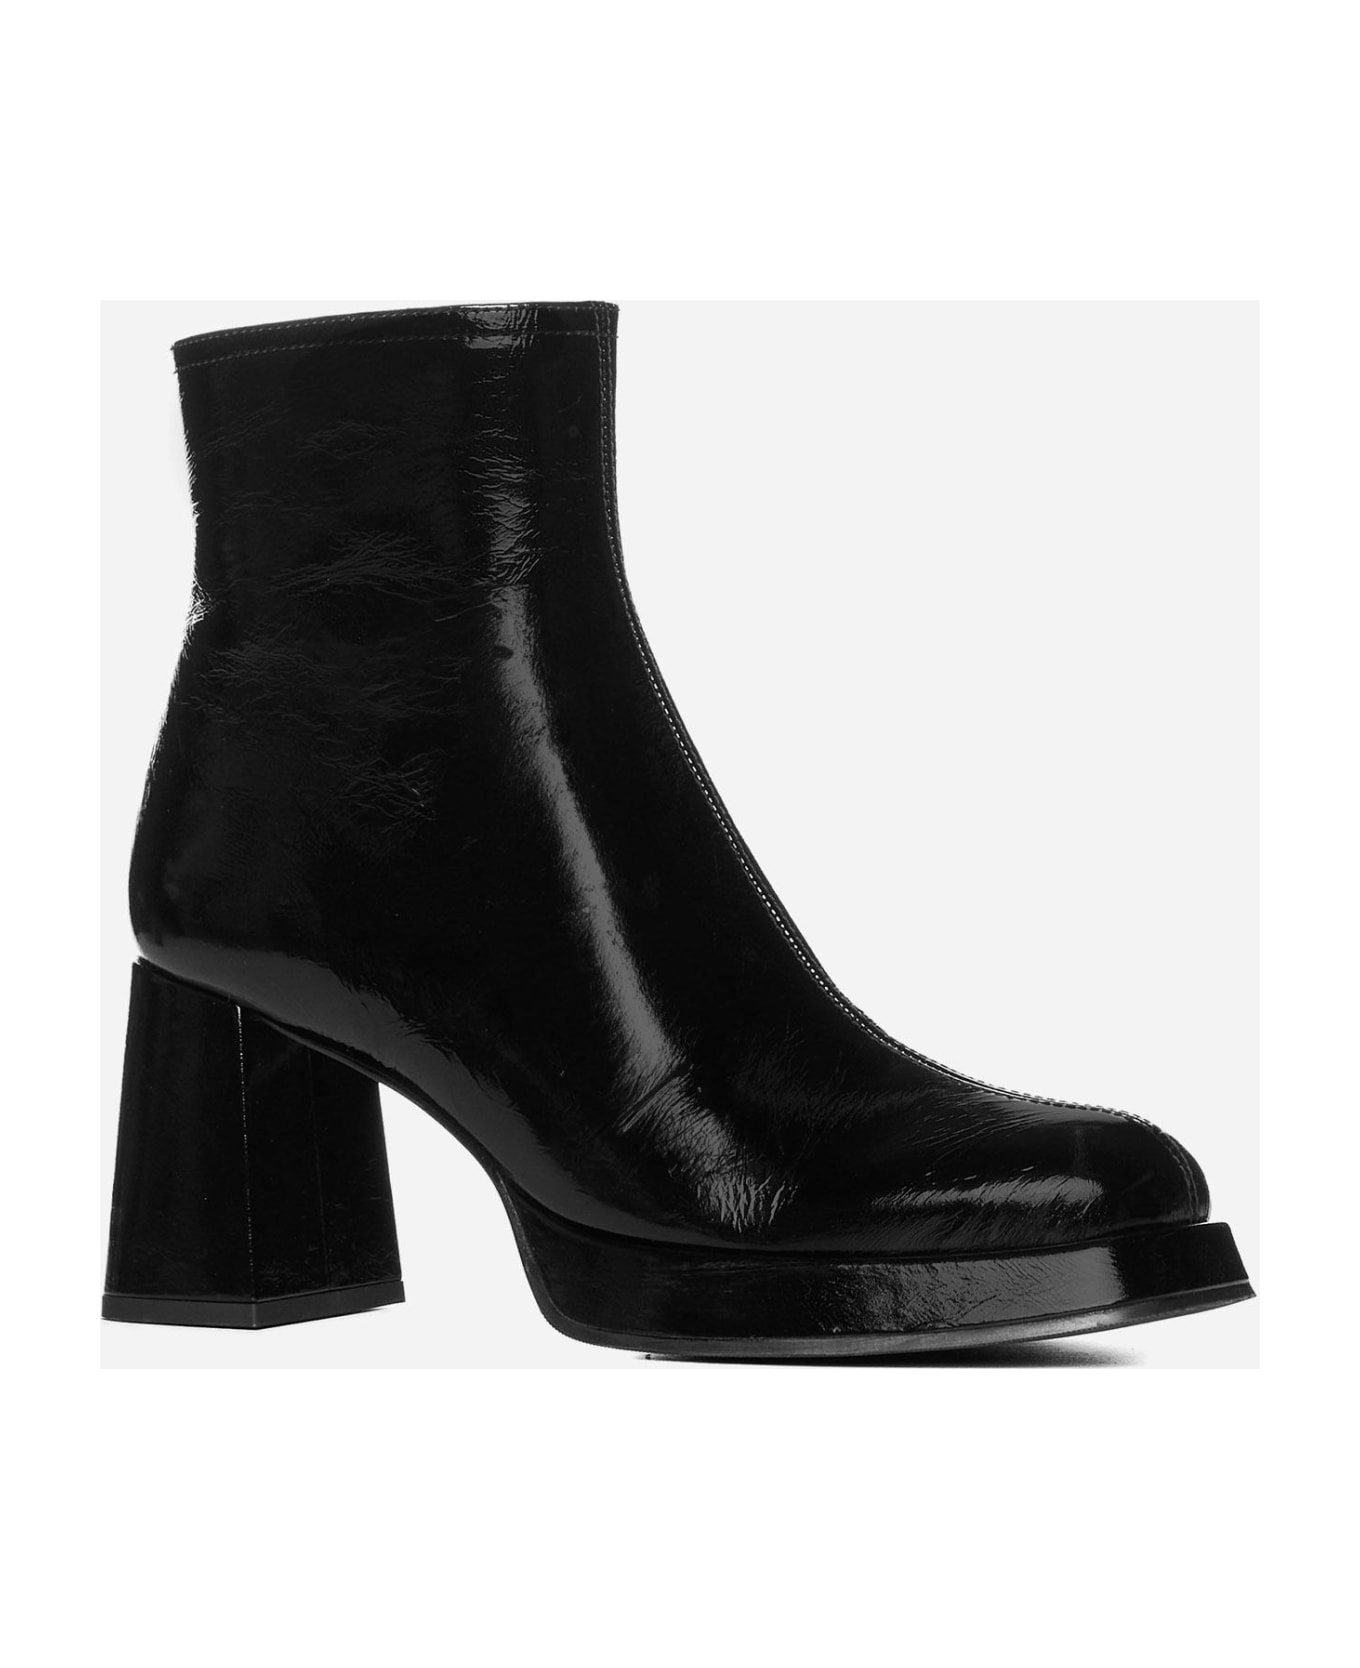 Chie Mihara Katrin Patent Leather Ankle Boots - Negro ブーツ